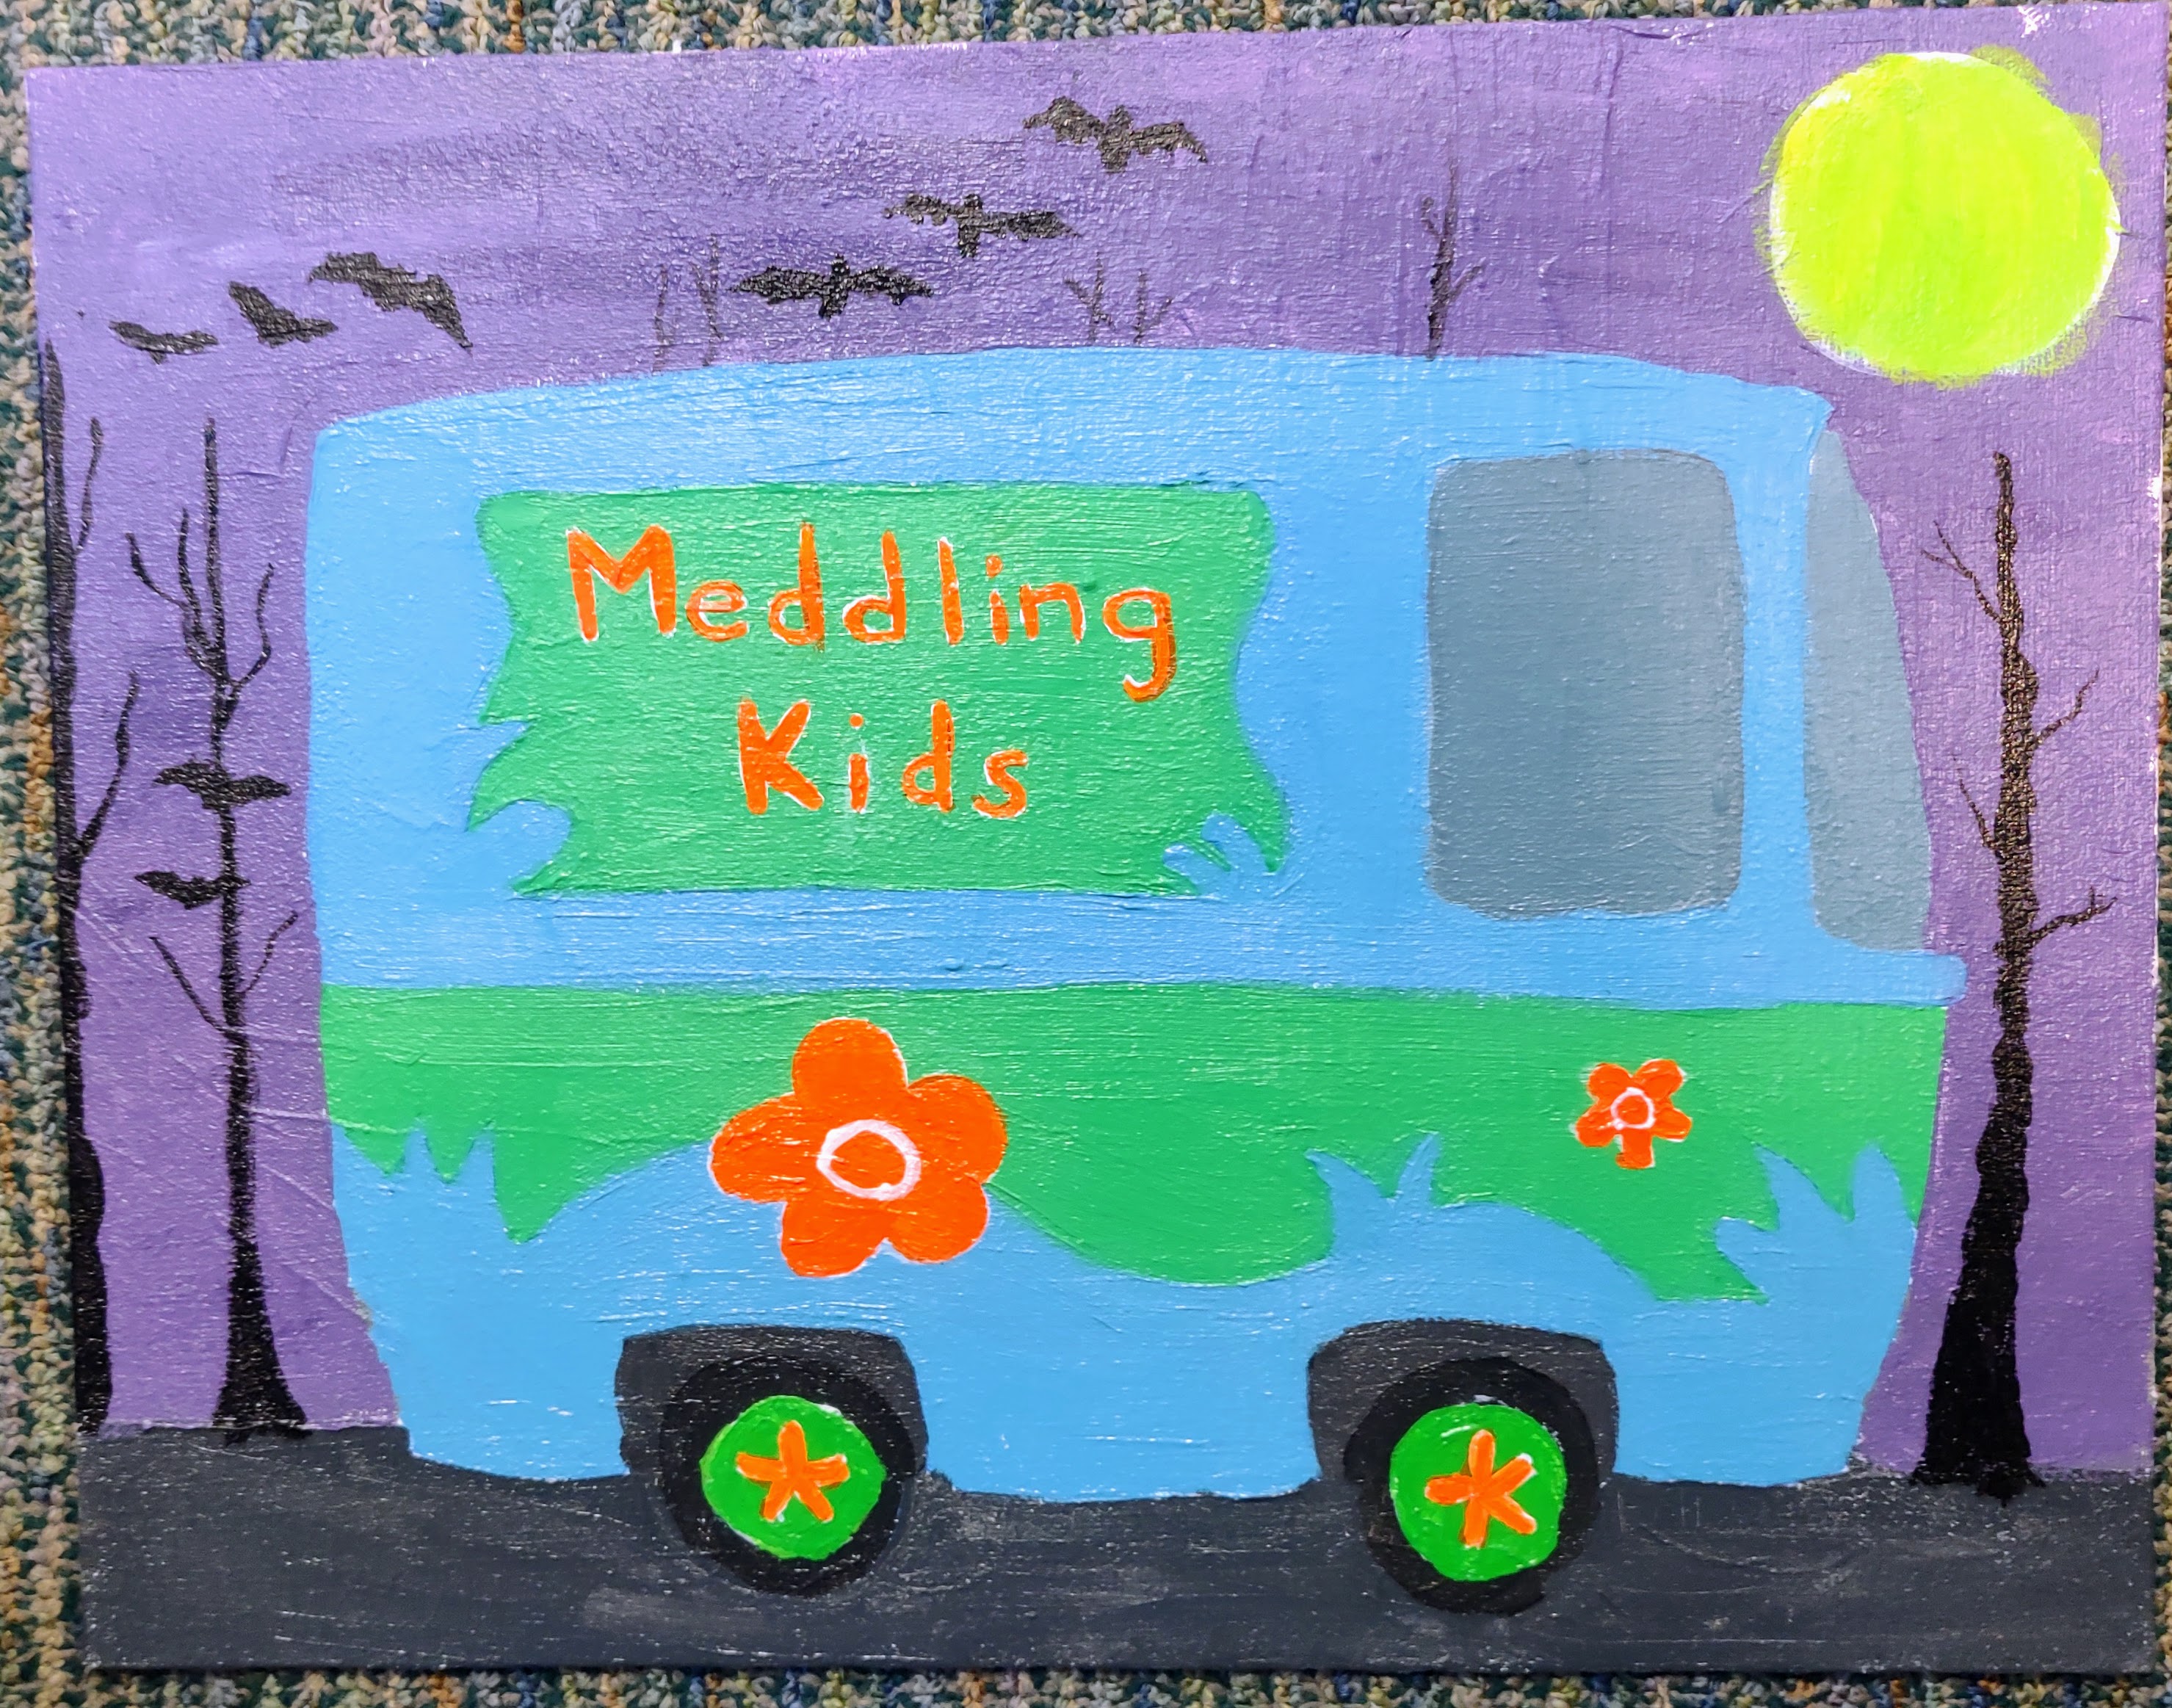 A painting of a blue and green van with orange flowers and the text Meddling Kids on the side. The background is a light purple with black trees, black bats, and a neon yellow green moon.